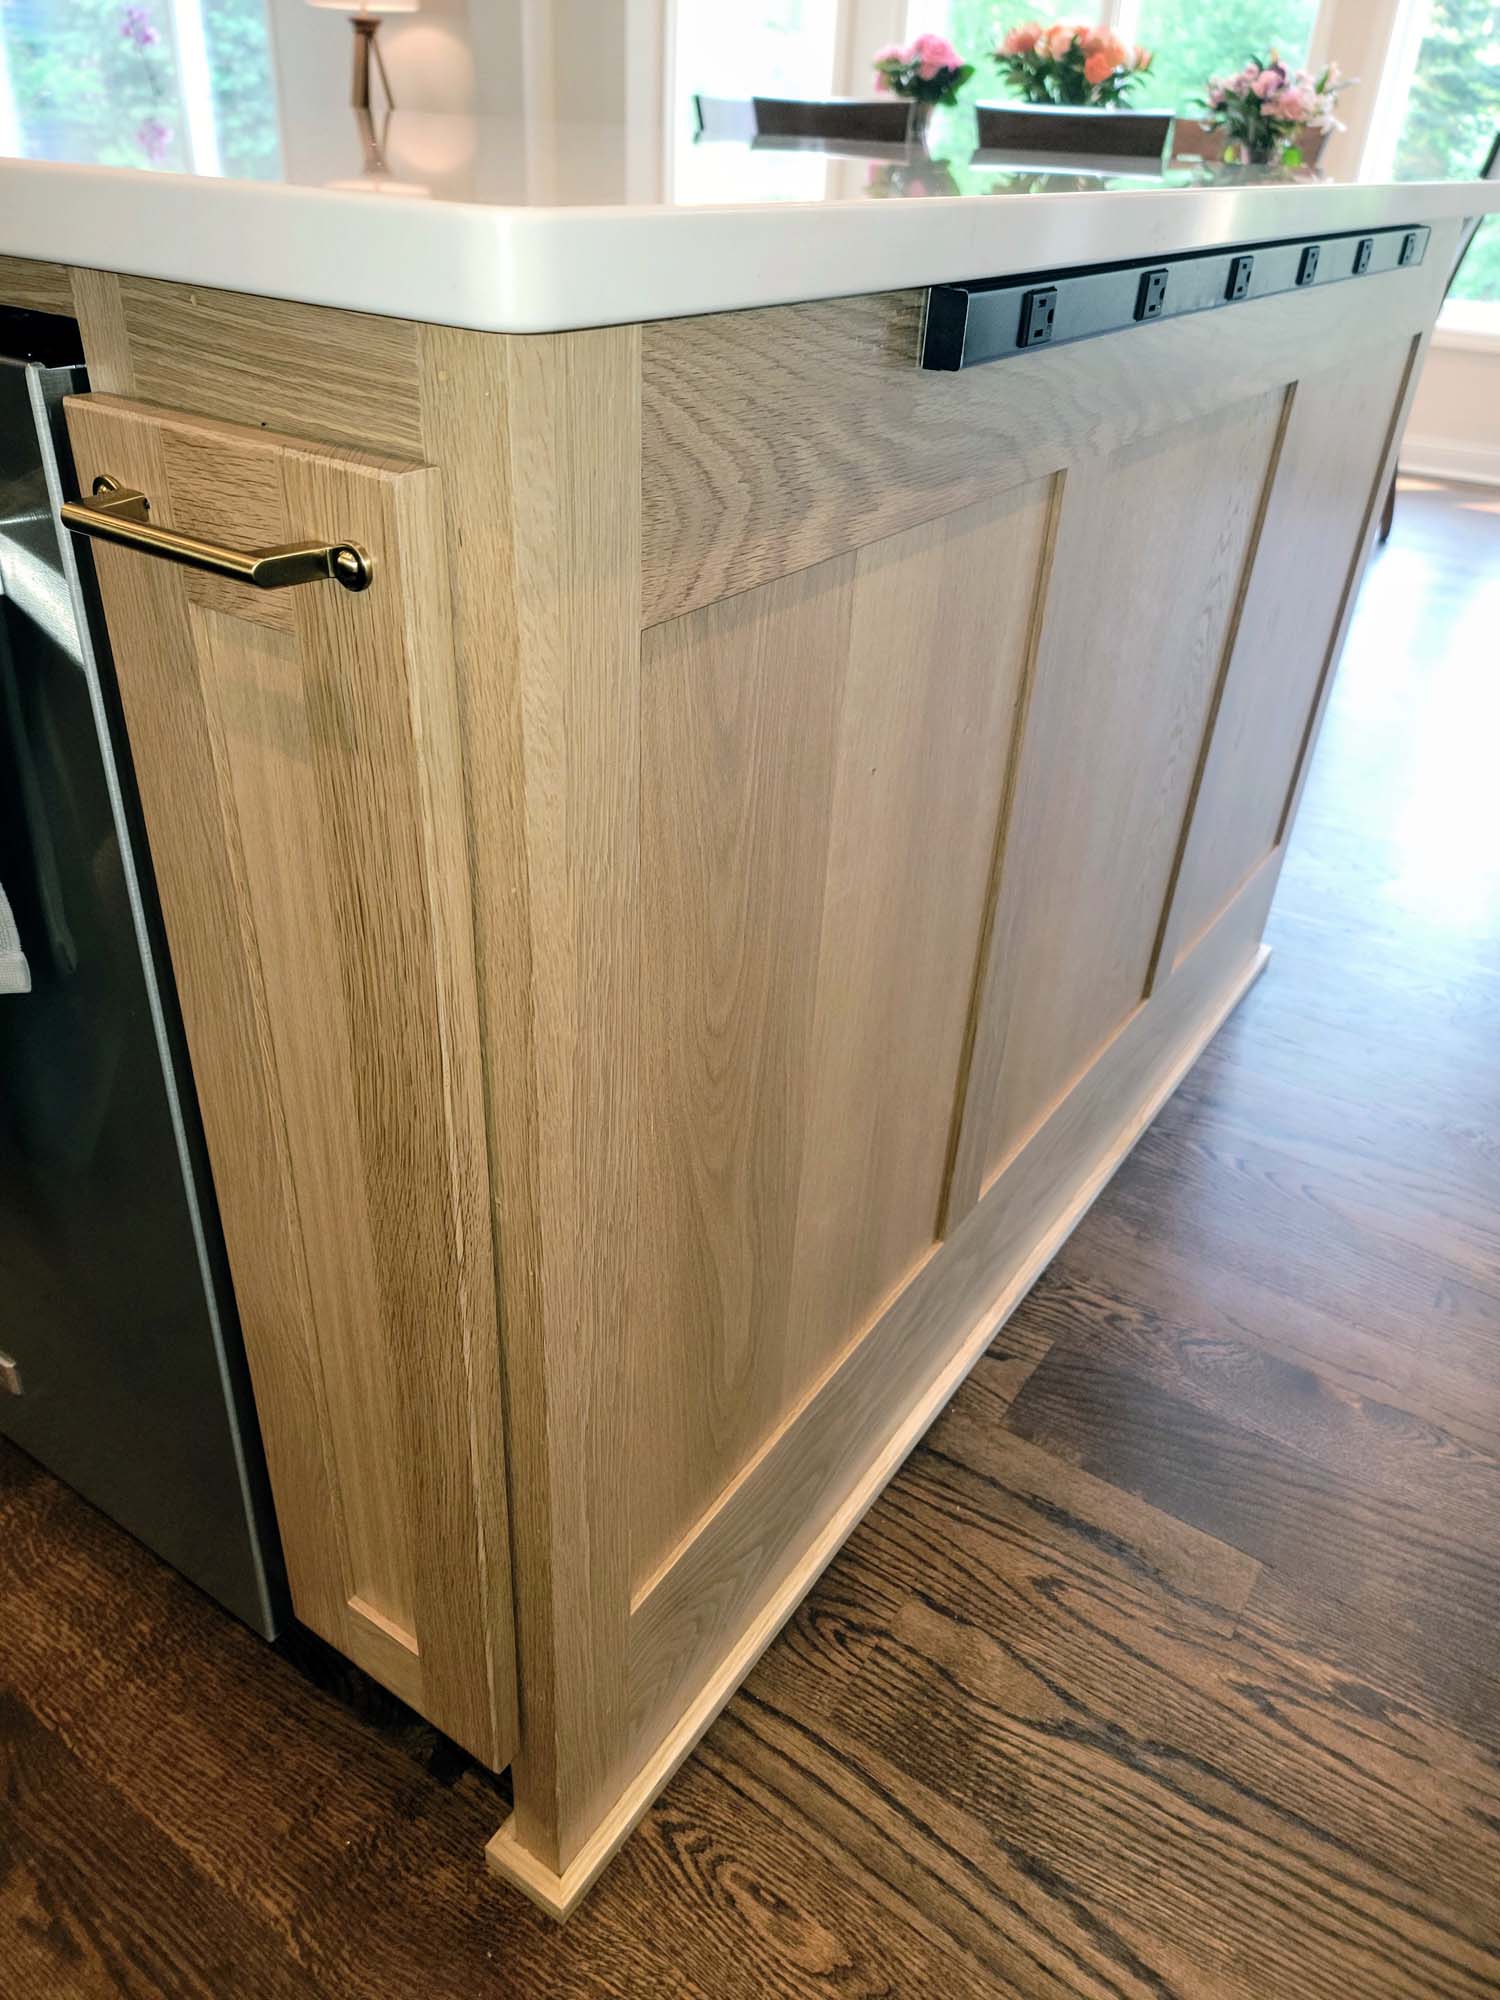 Kitchen island shaker style end panels with strip of outlets